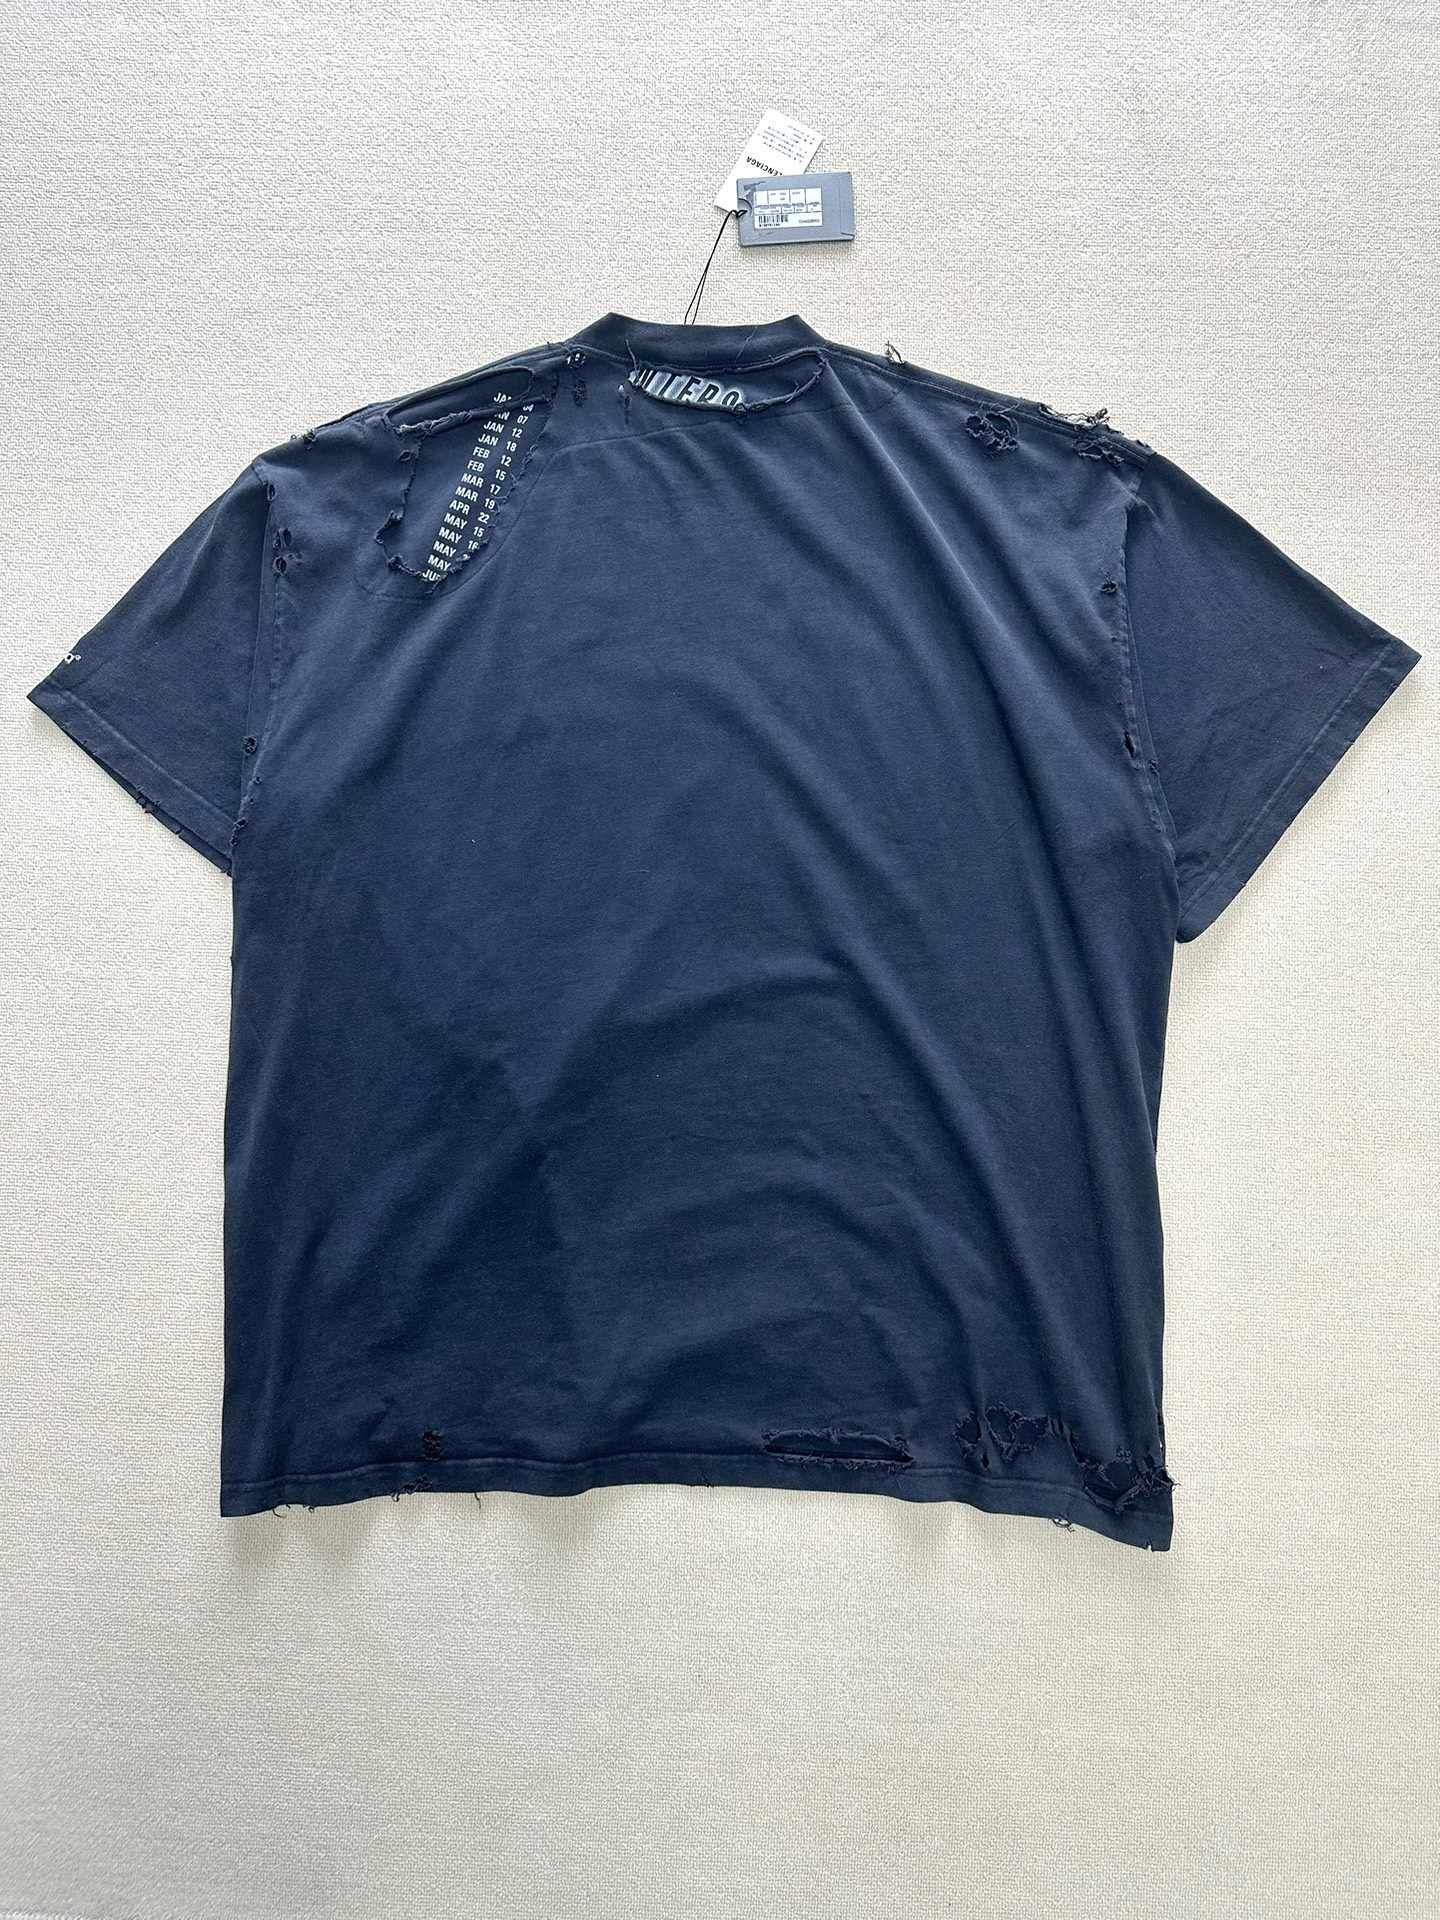 Balenciaga Faded Black 3B Repaired Destroyed Layered T-Shirt - 1